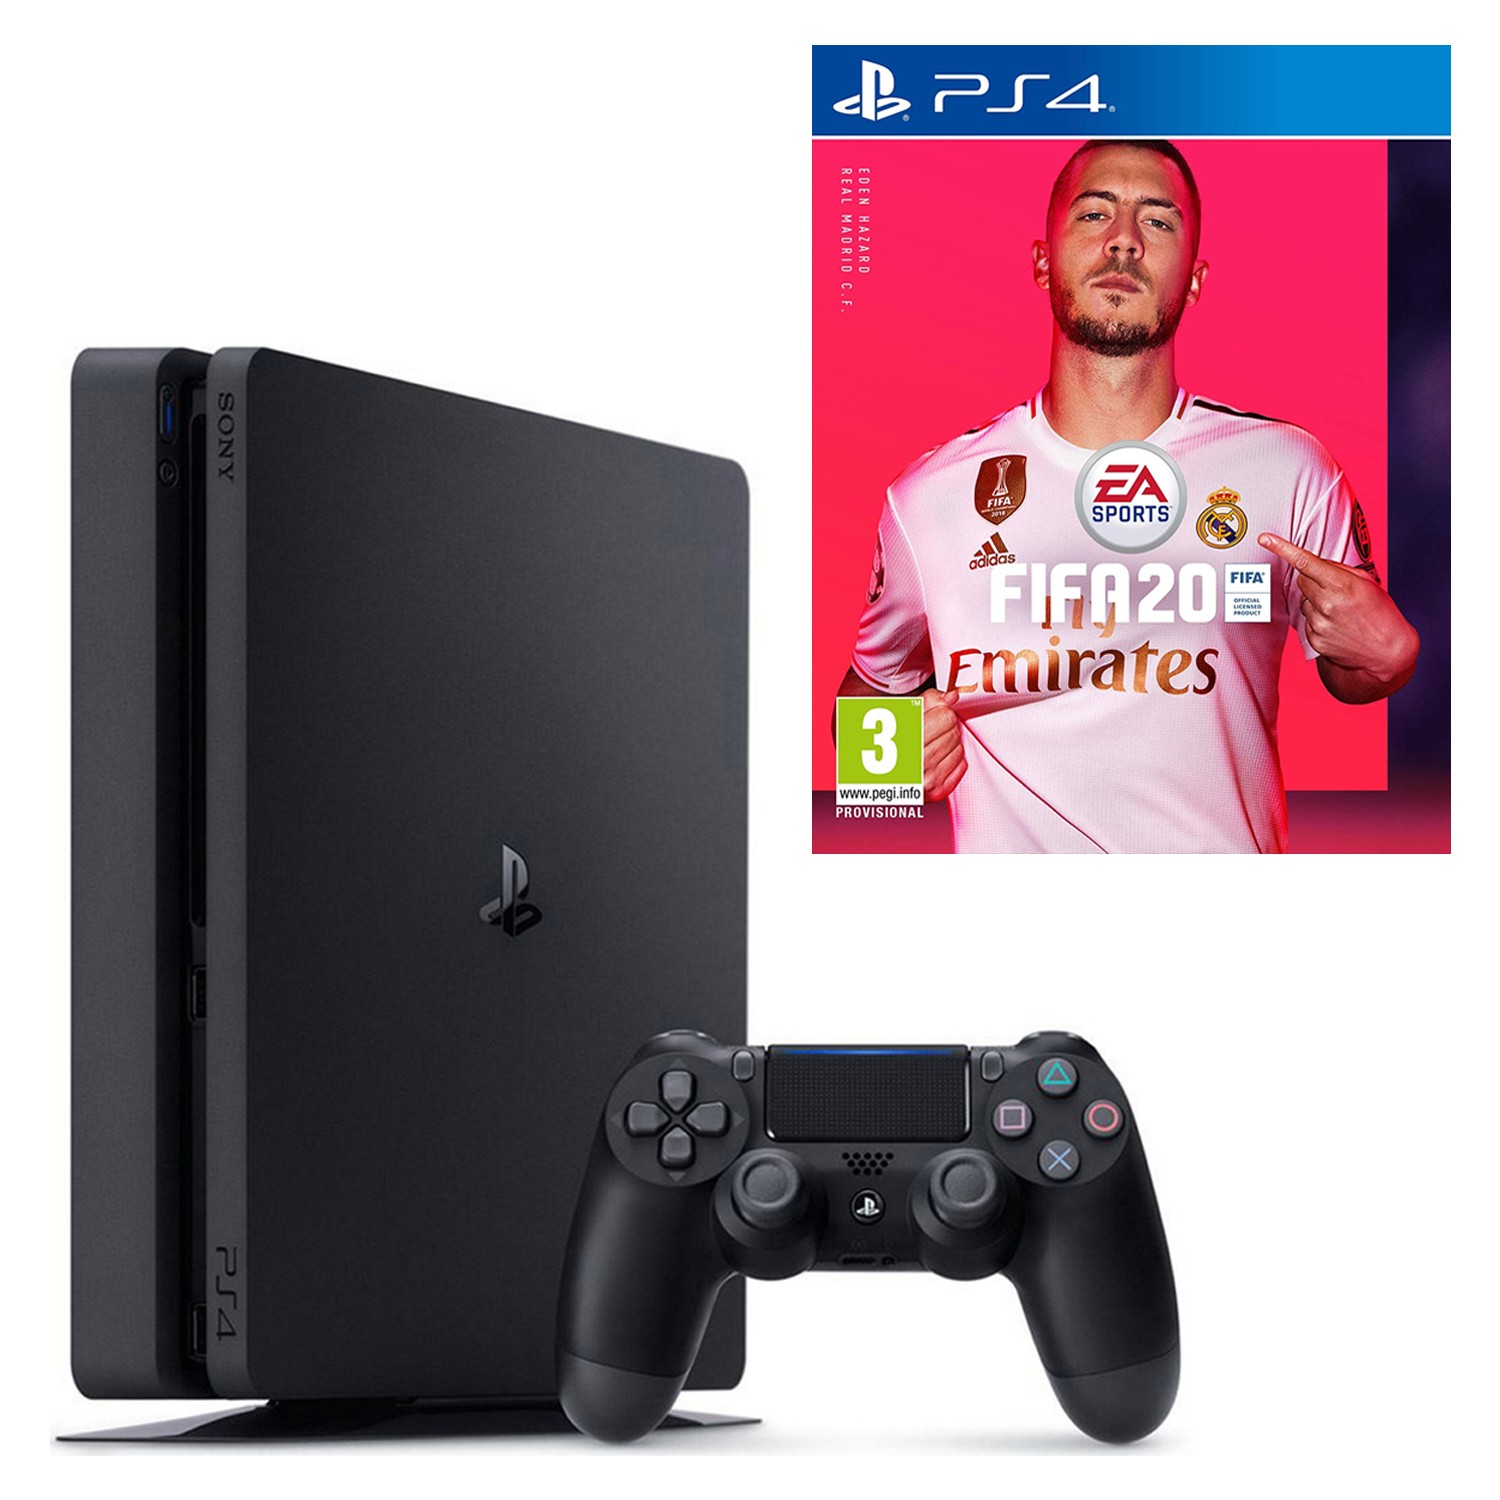 Sony Ps4 1tb Console & Fifa 20 Bundle | UP TO 57% OFF